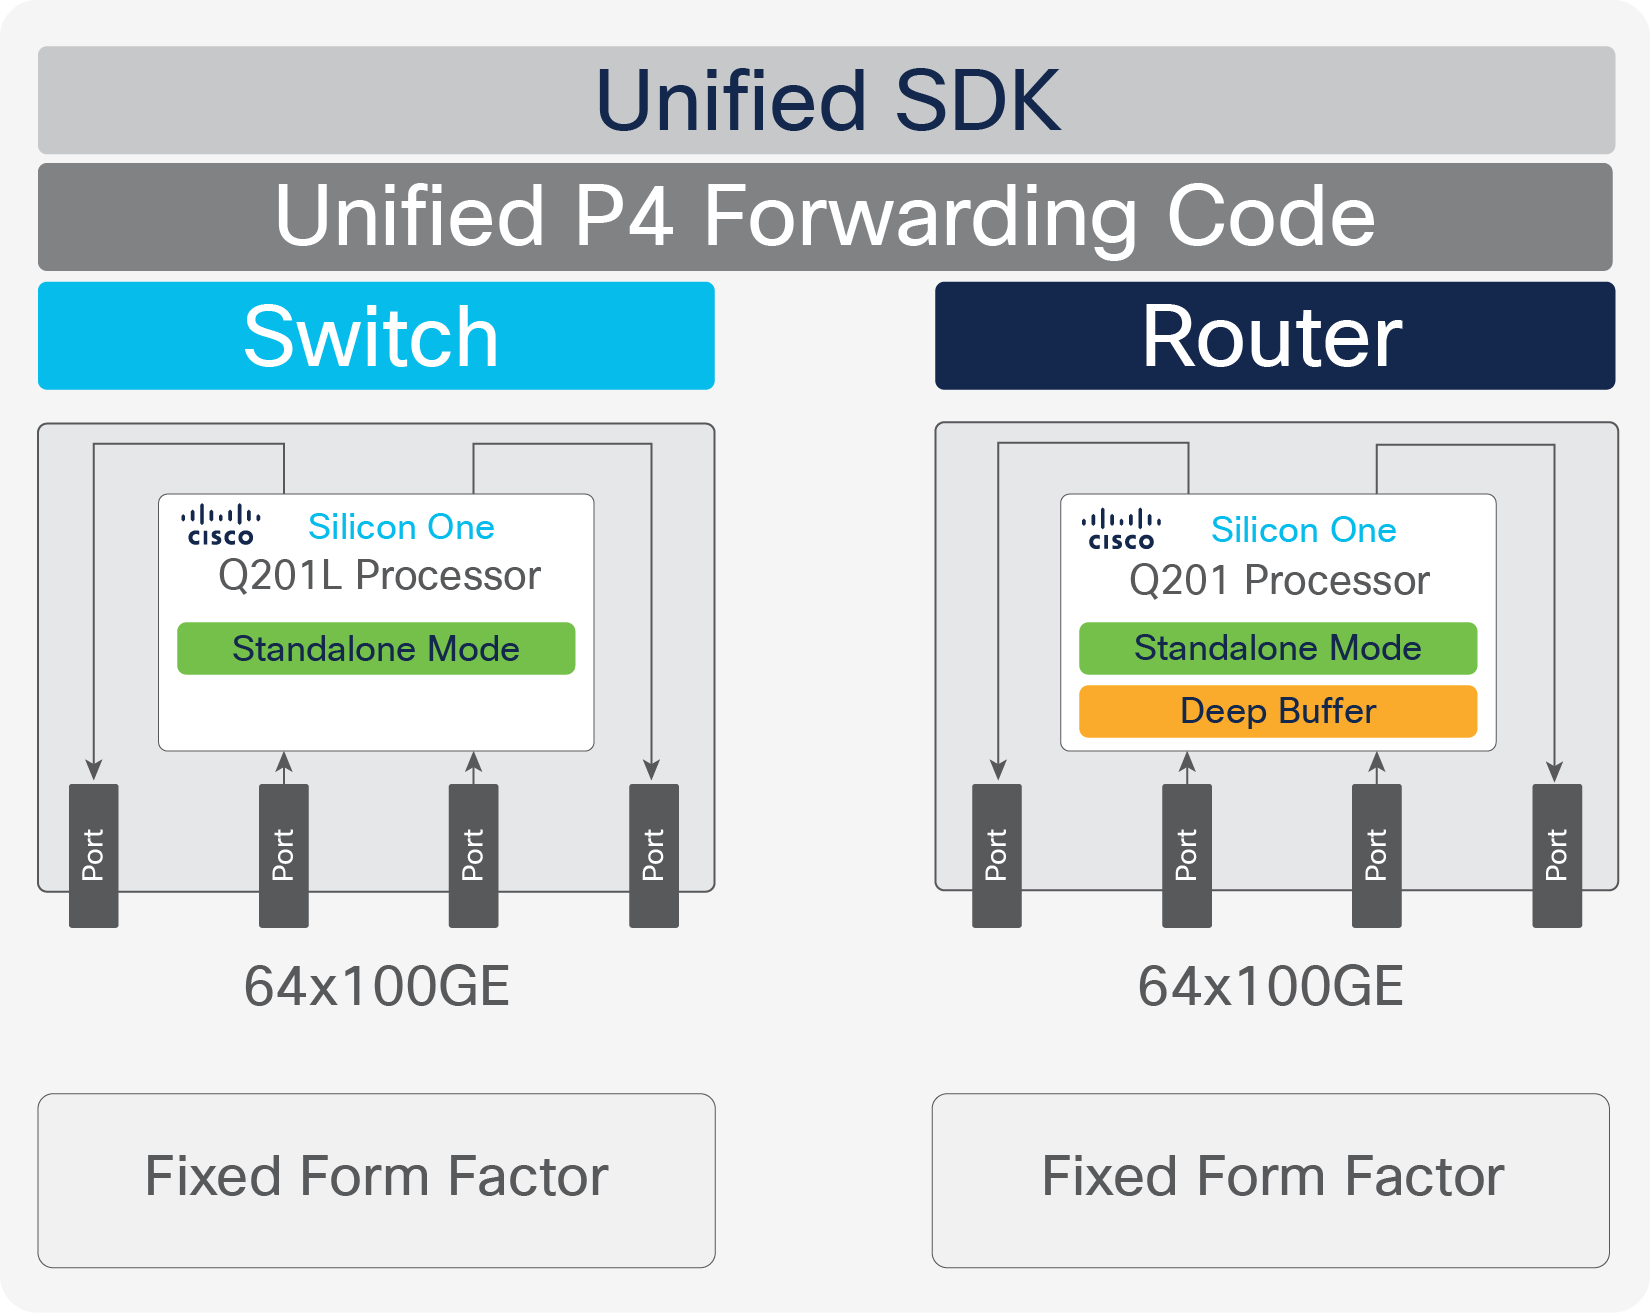 Unified SDK